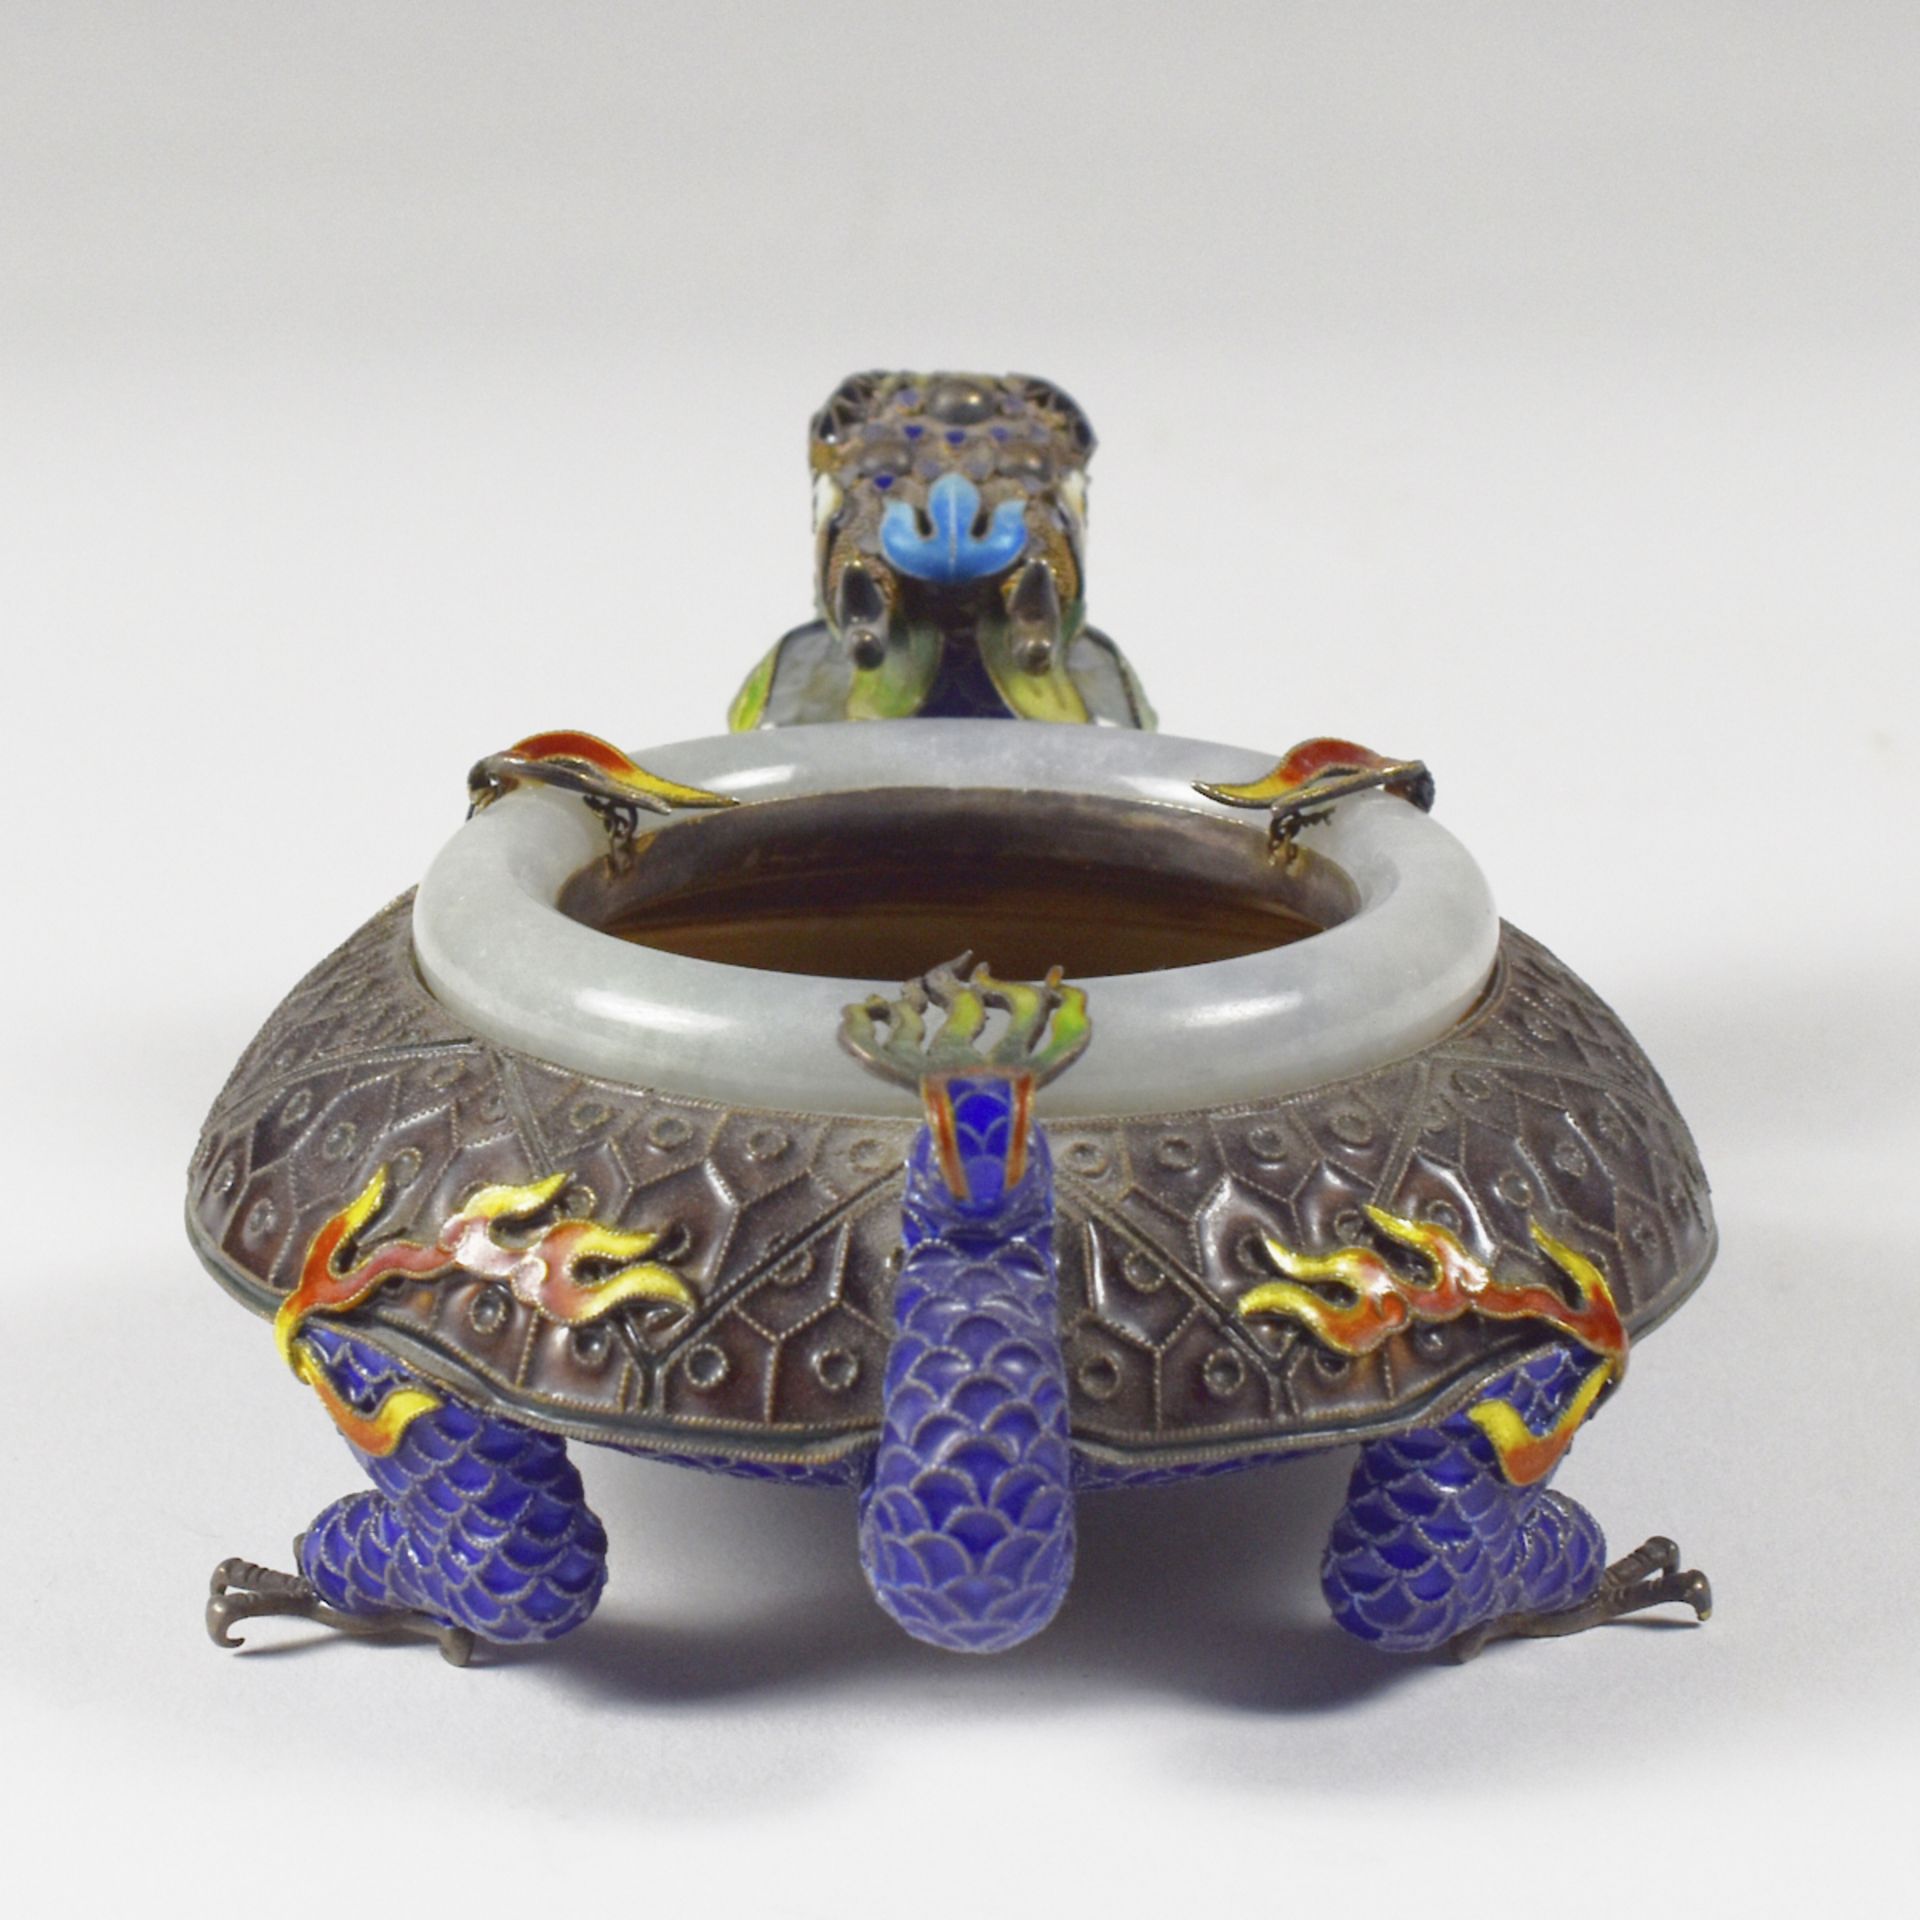 20th c. Chinese Silver Enameled Silver & Jade Dragon Ashtray - Image 4 of 8